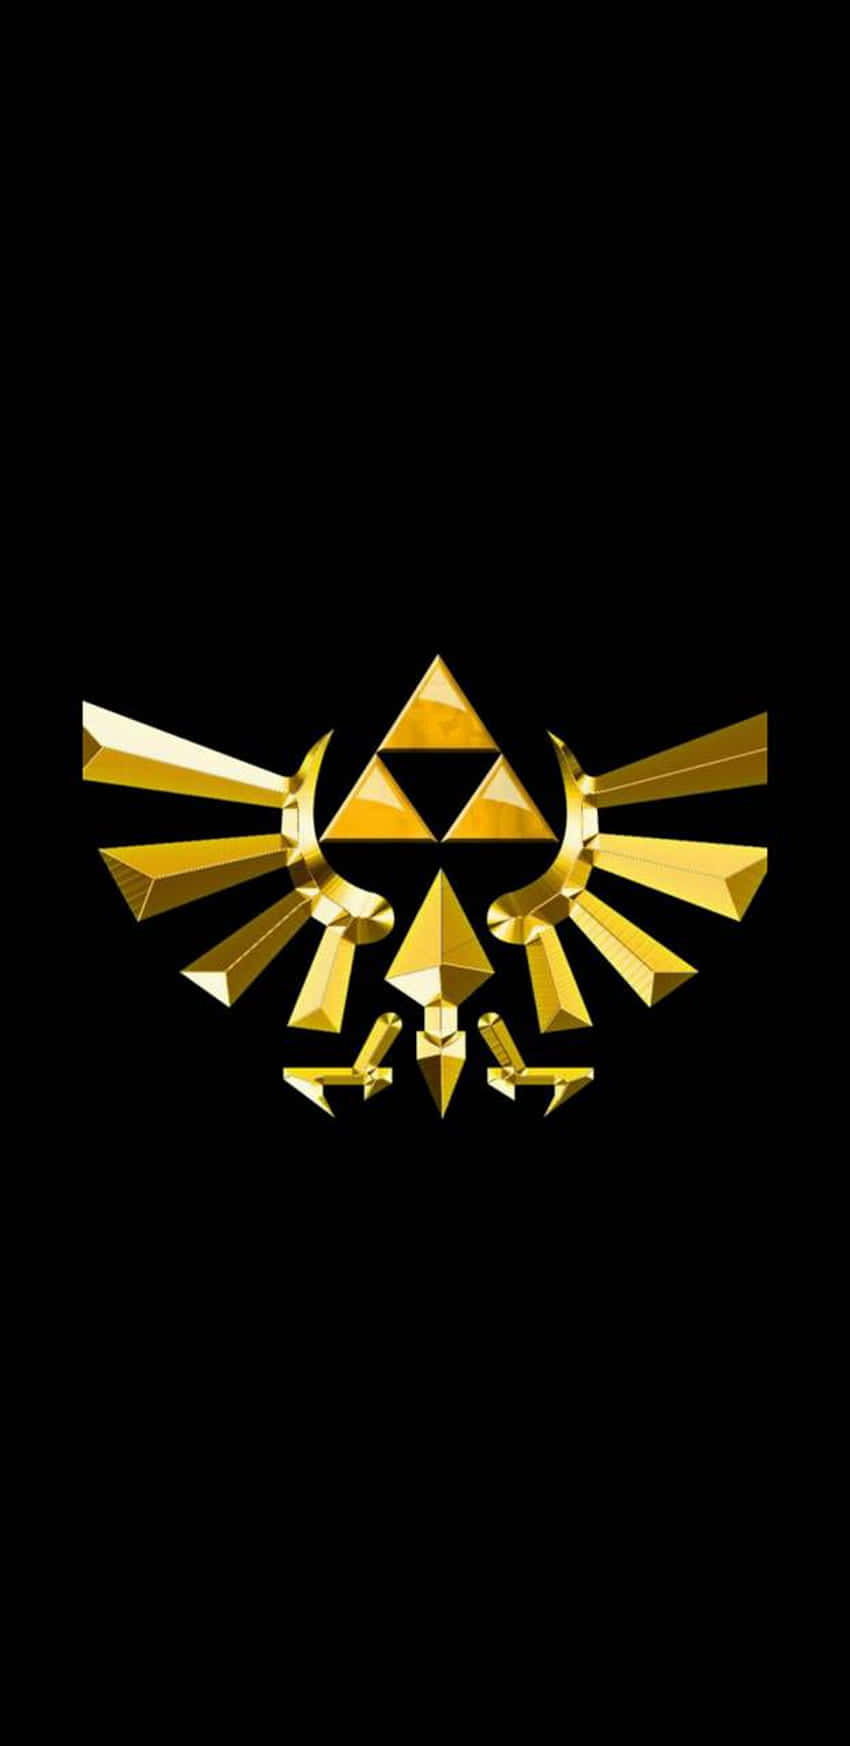 Bright and Colorful Triforce Wallpaper